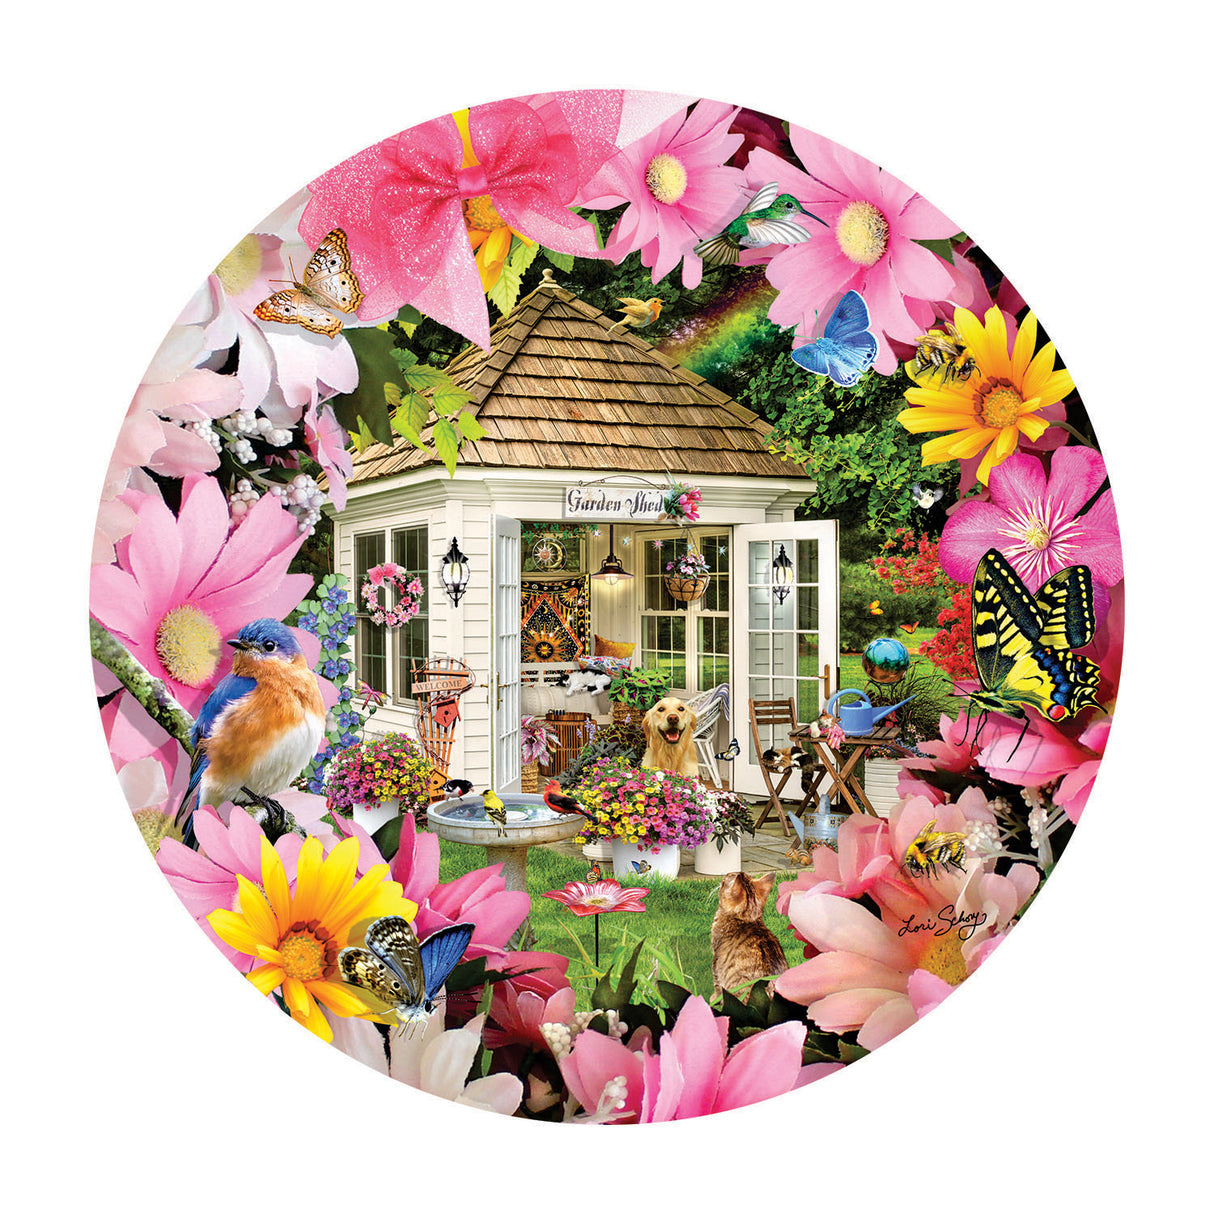 Garden Shed in Flower Jigsaw Puzzle